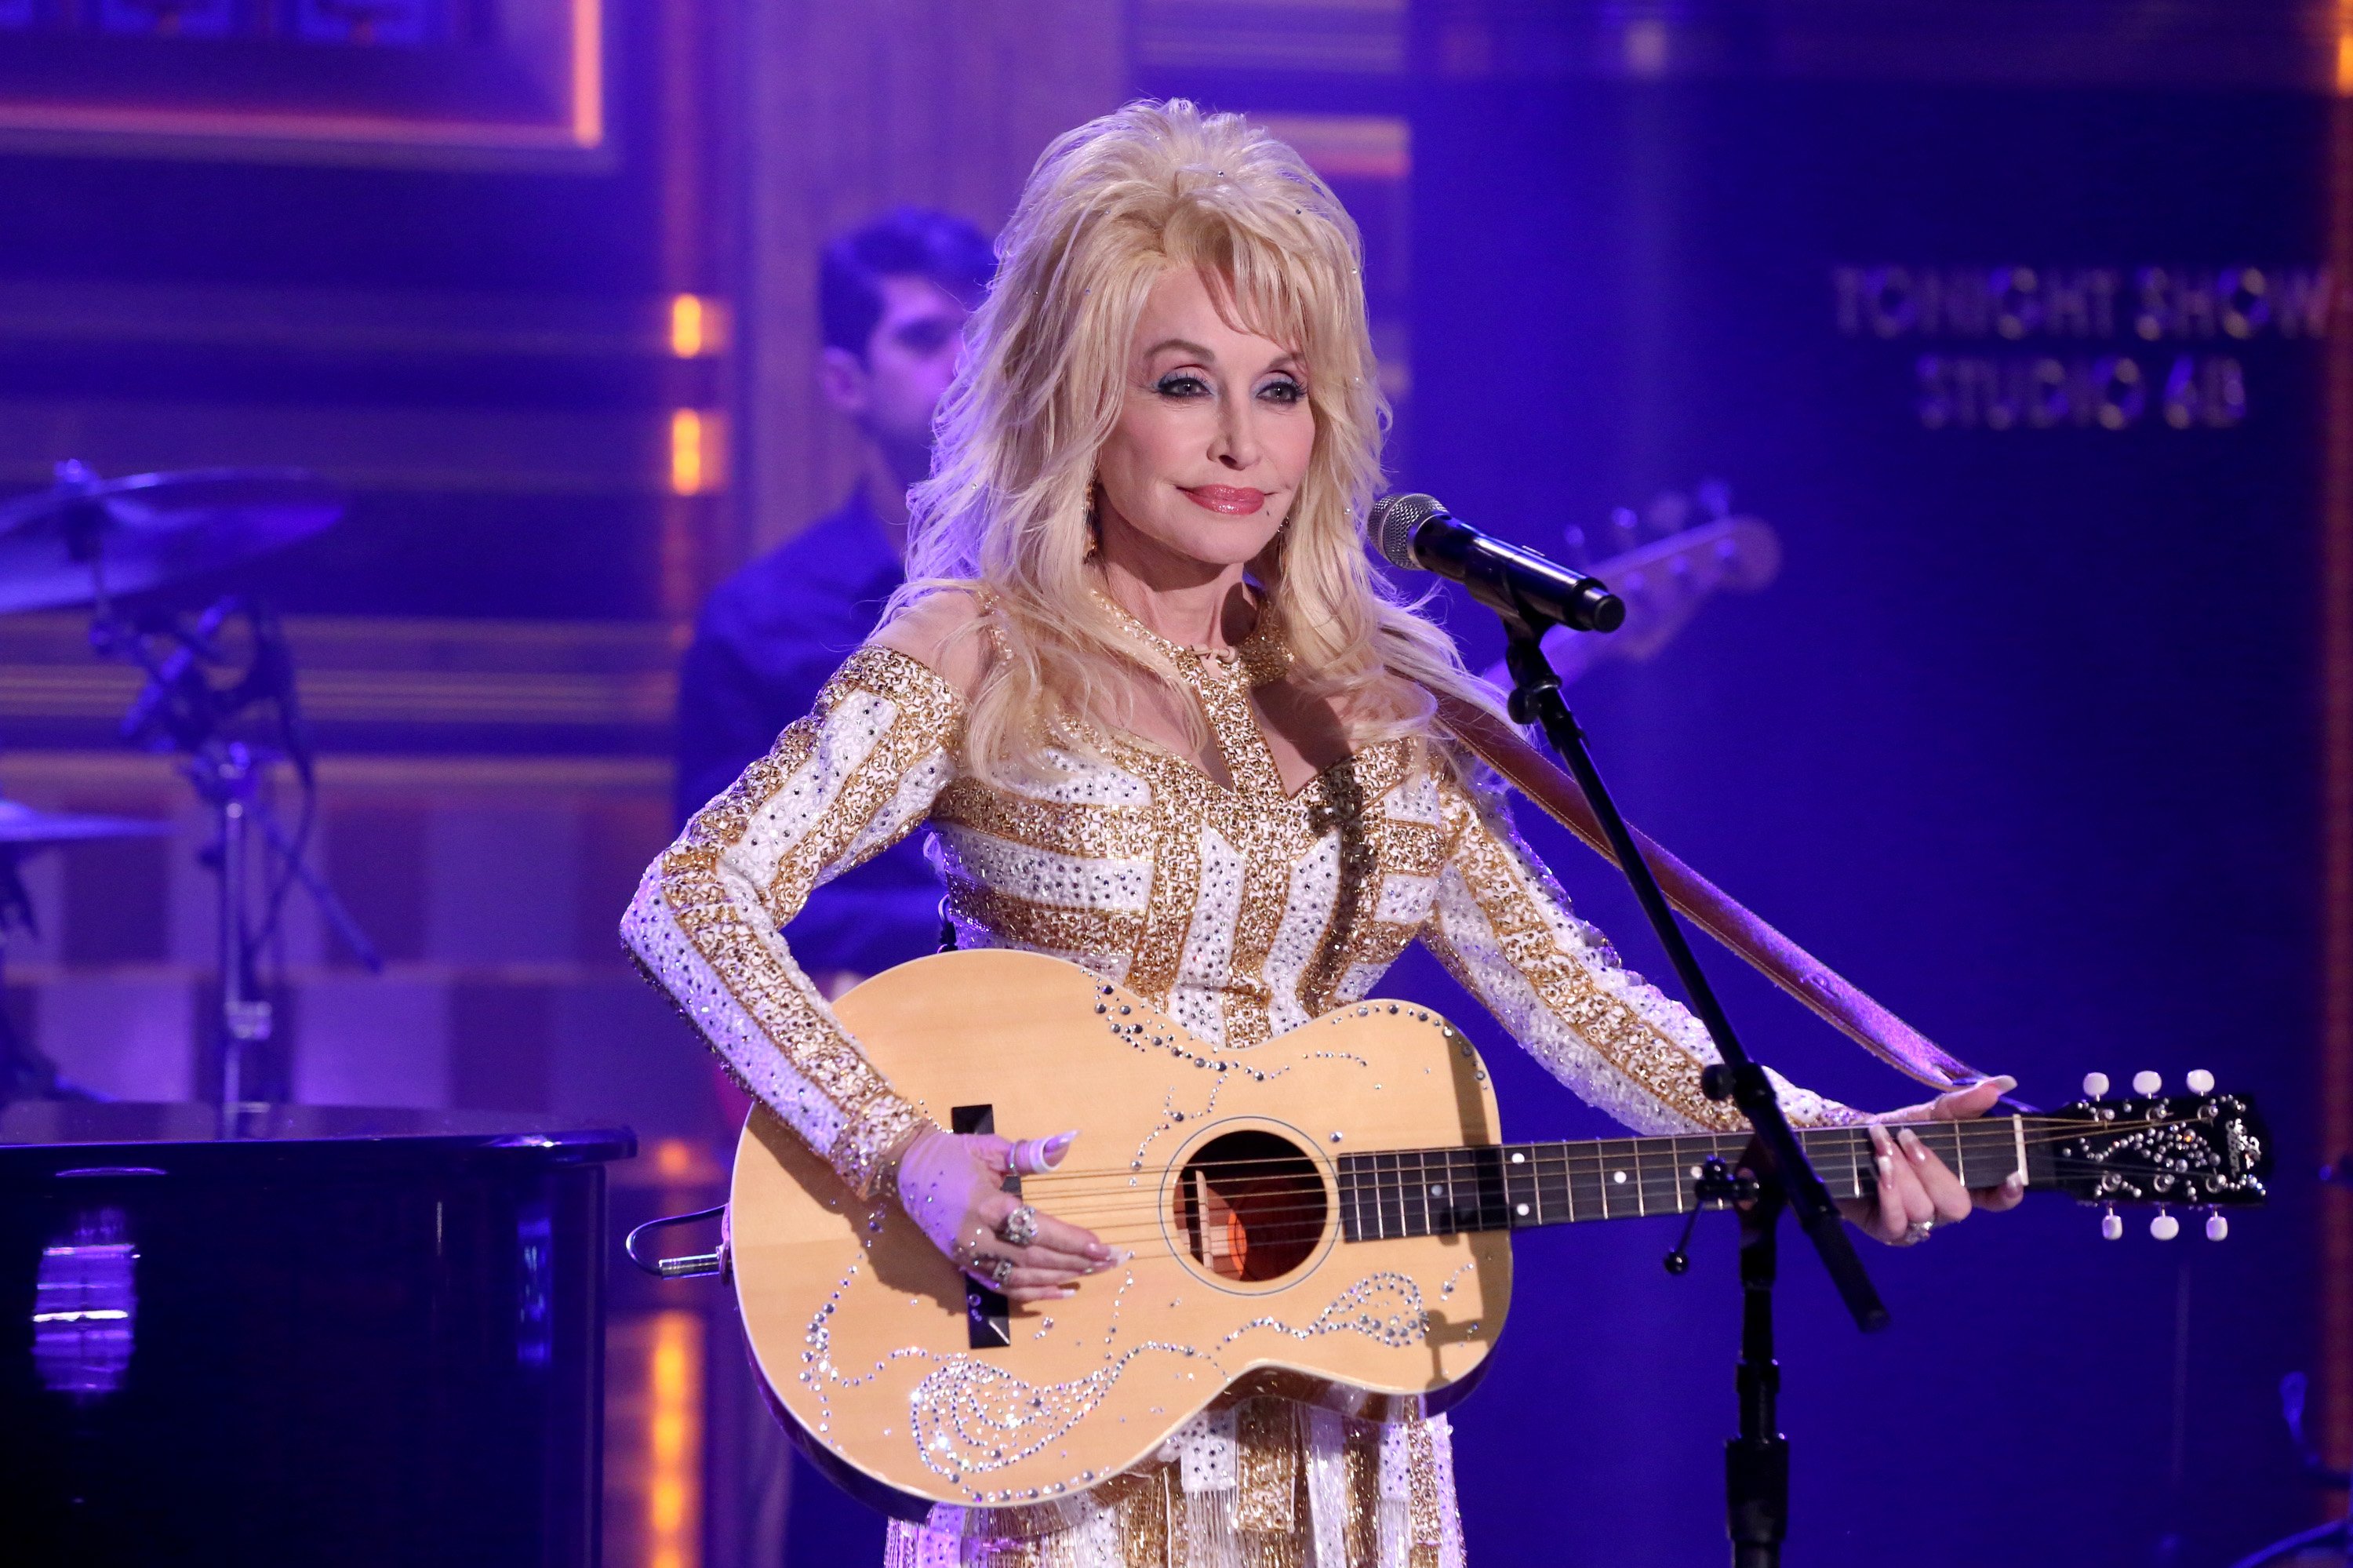 'I Will Always Love You' singer Dolly Parton performing on 'The Tonight Show Starring Jimmy Fallon'